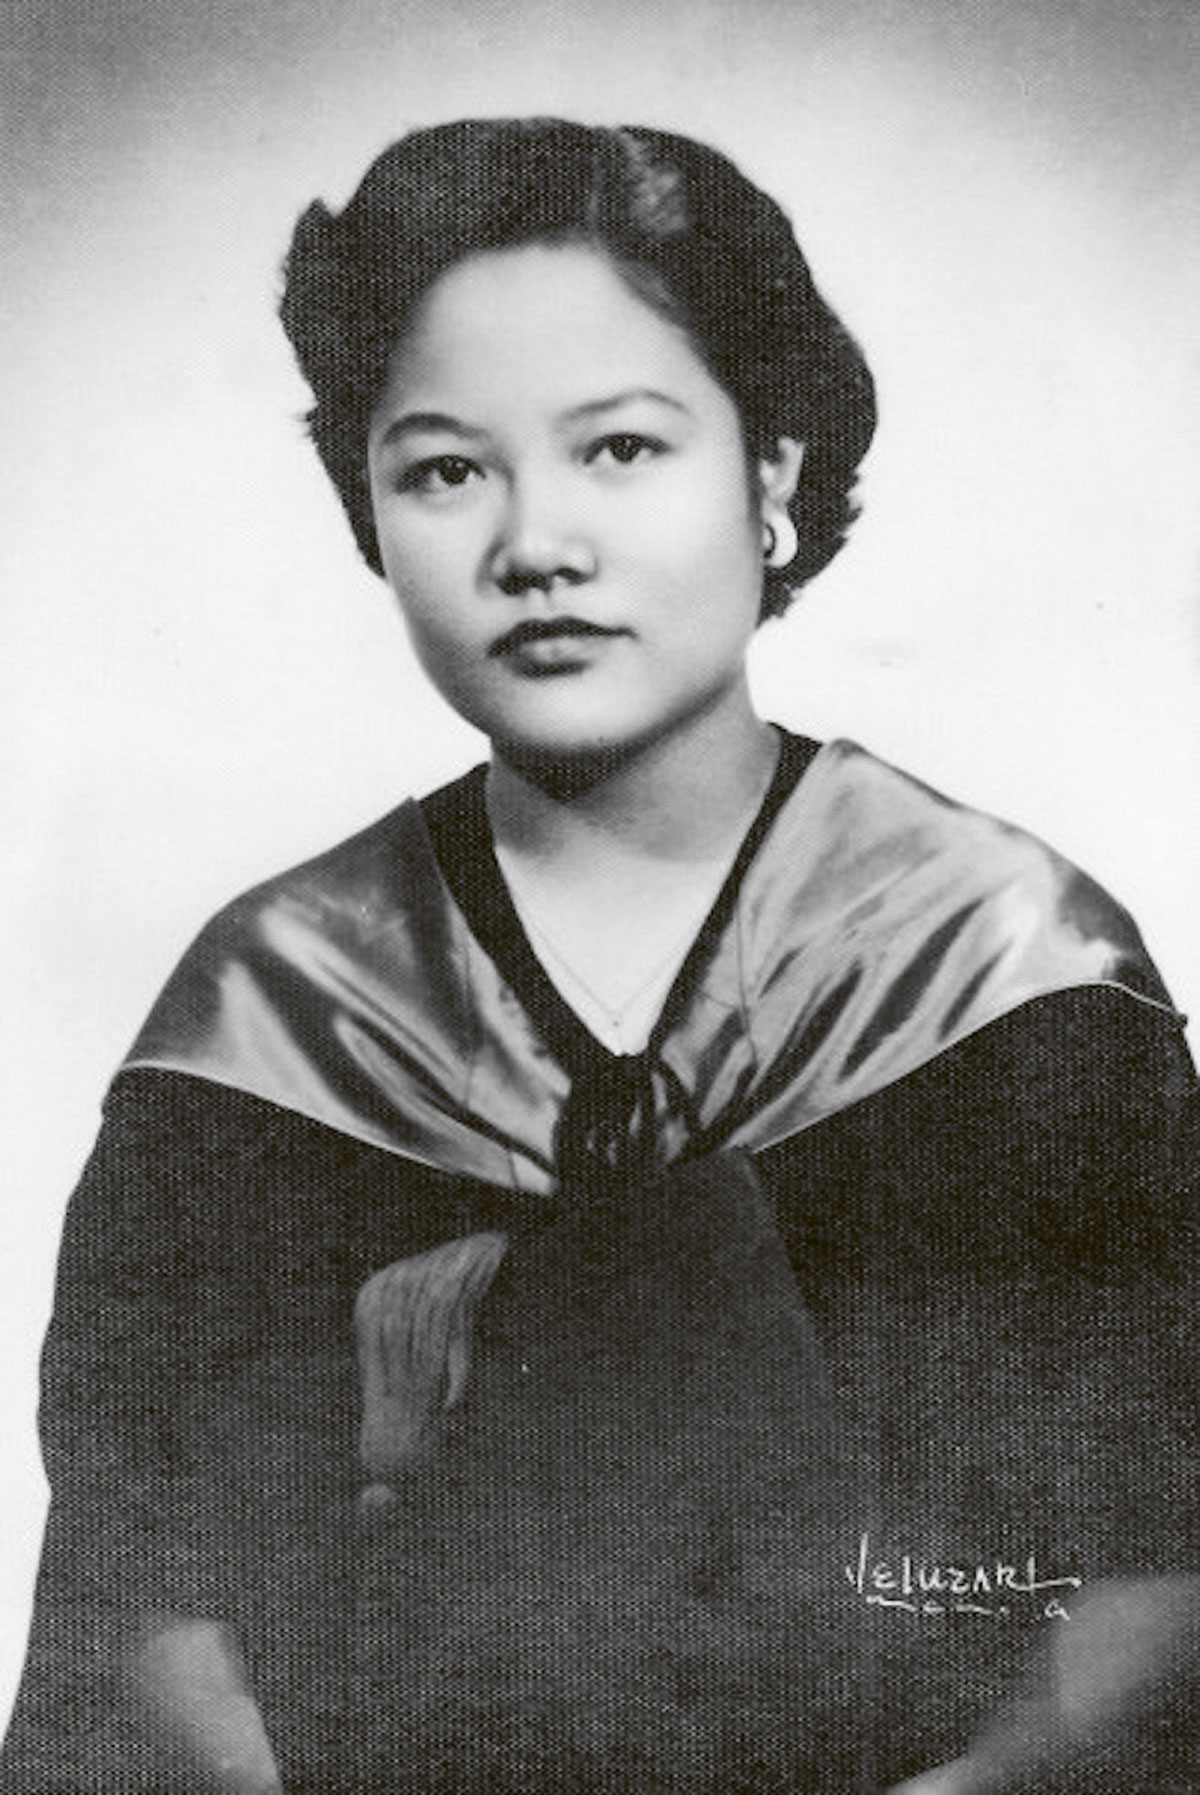 Doreen Gamboa Fernandez authored many books that have become fixtures in the food industry, including "Tikim: Essays on Philippine Food and Culture"